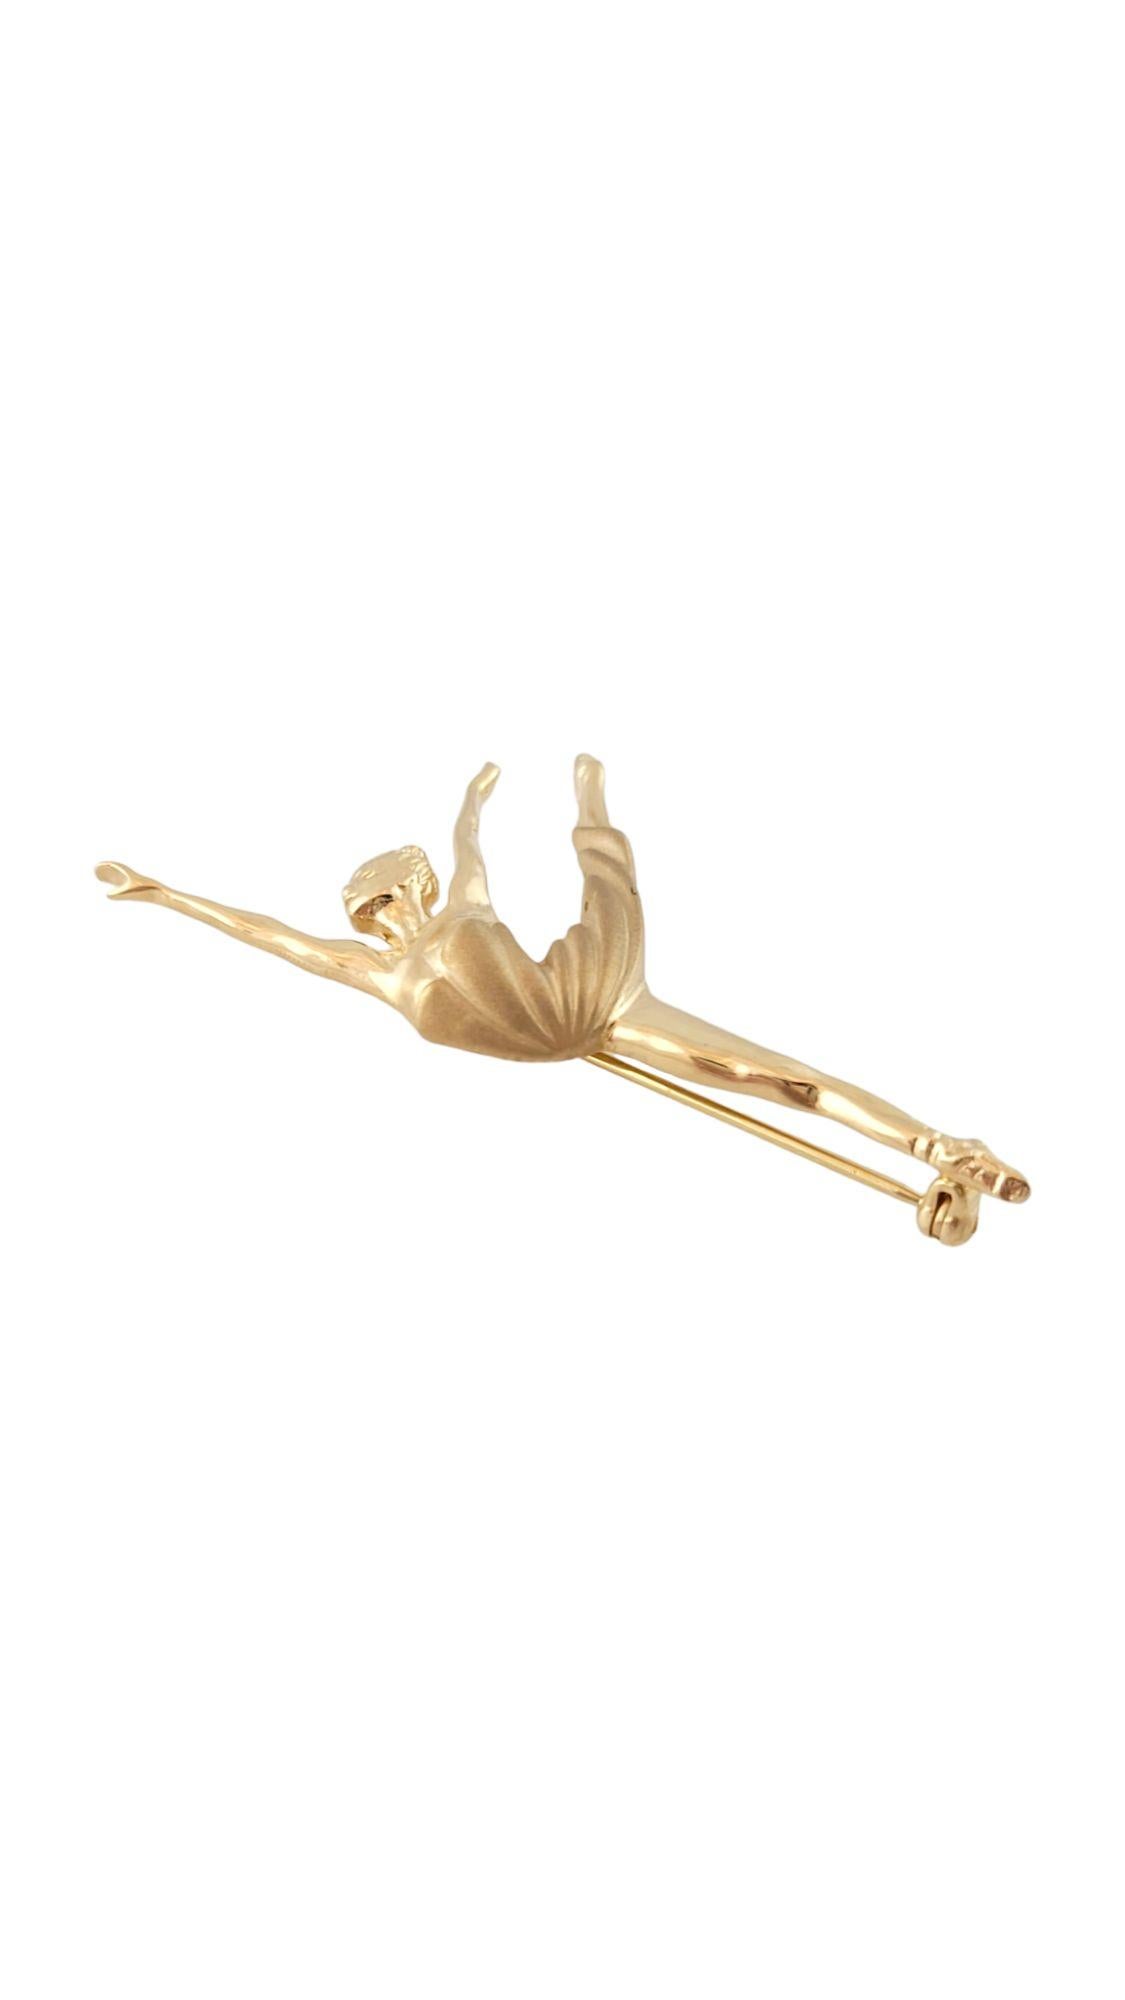 Vintage 14K Yellow Gold Ballerina Pin

This gorgeous ballerina pin is crafted from 14K yellow gold and would make the perfect gift for any ballet lover!

Size: 50.69mm X 27.71mm

Weight: 5.18 g/ 3.3 dwt

Hallmark: 14K ALA

Very good condition,